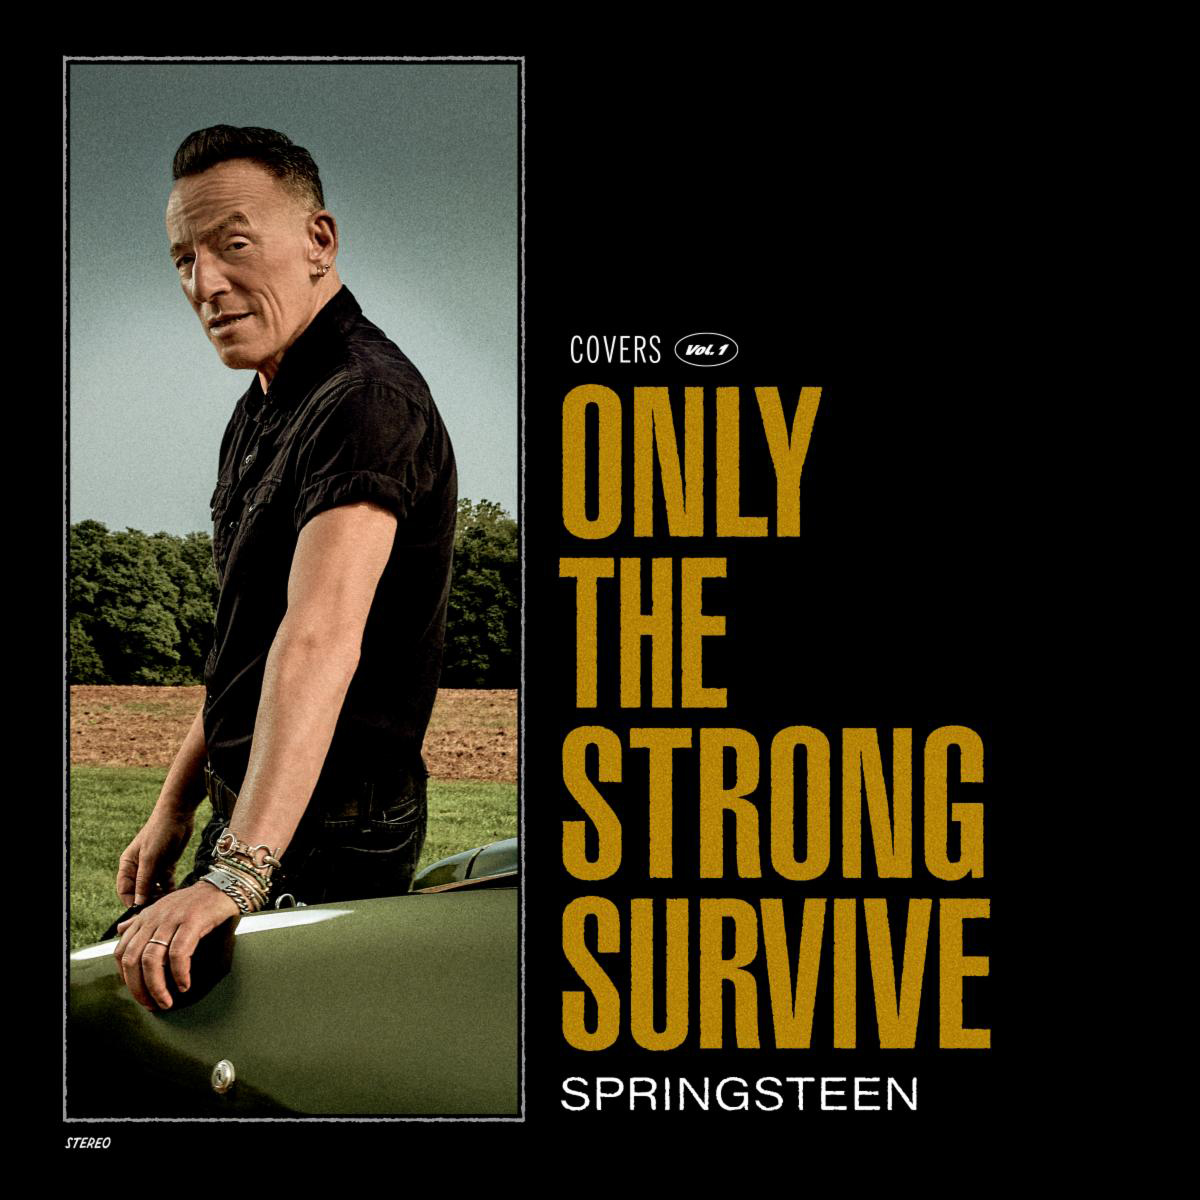 Only The Strong Survive - nowy album Bruce'a Springsteena już 11 listopada!